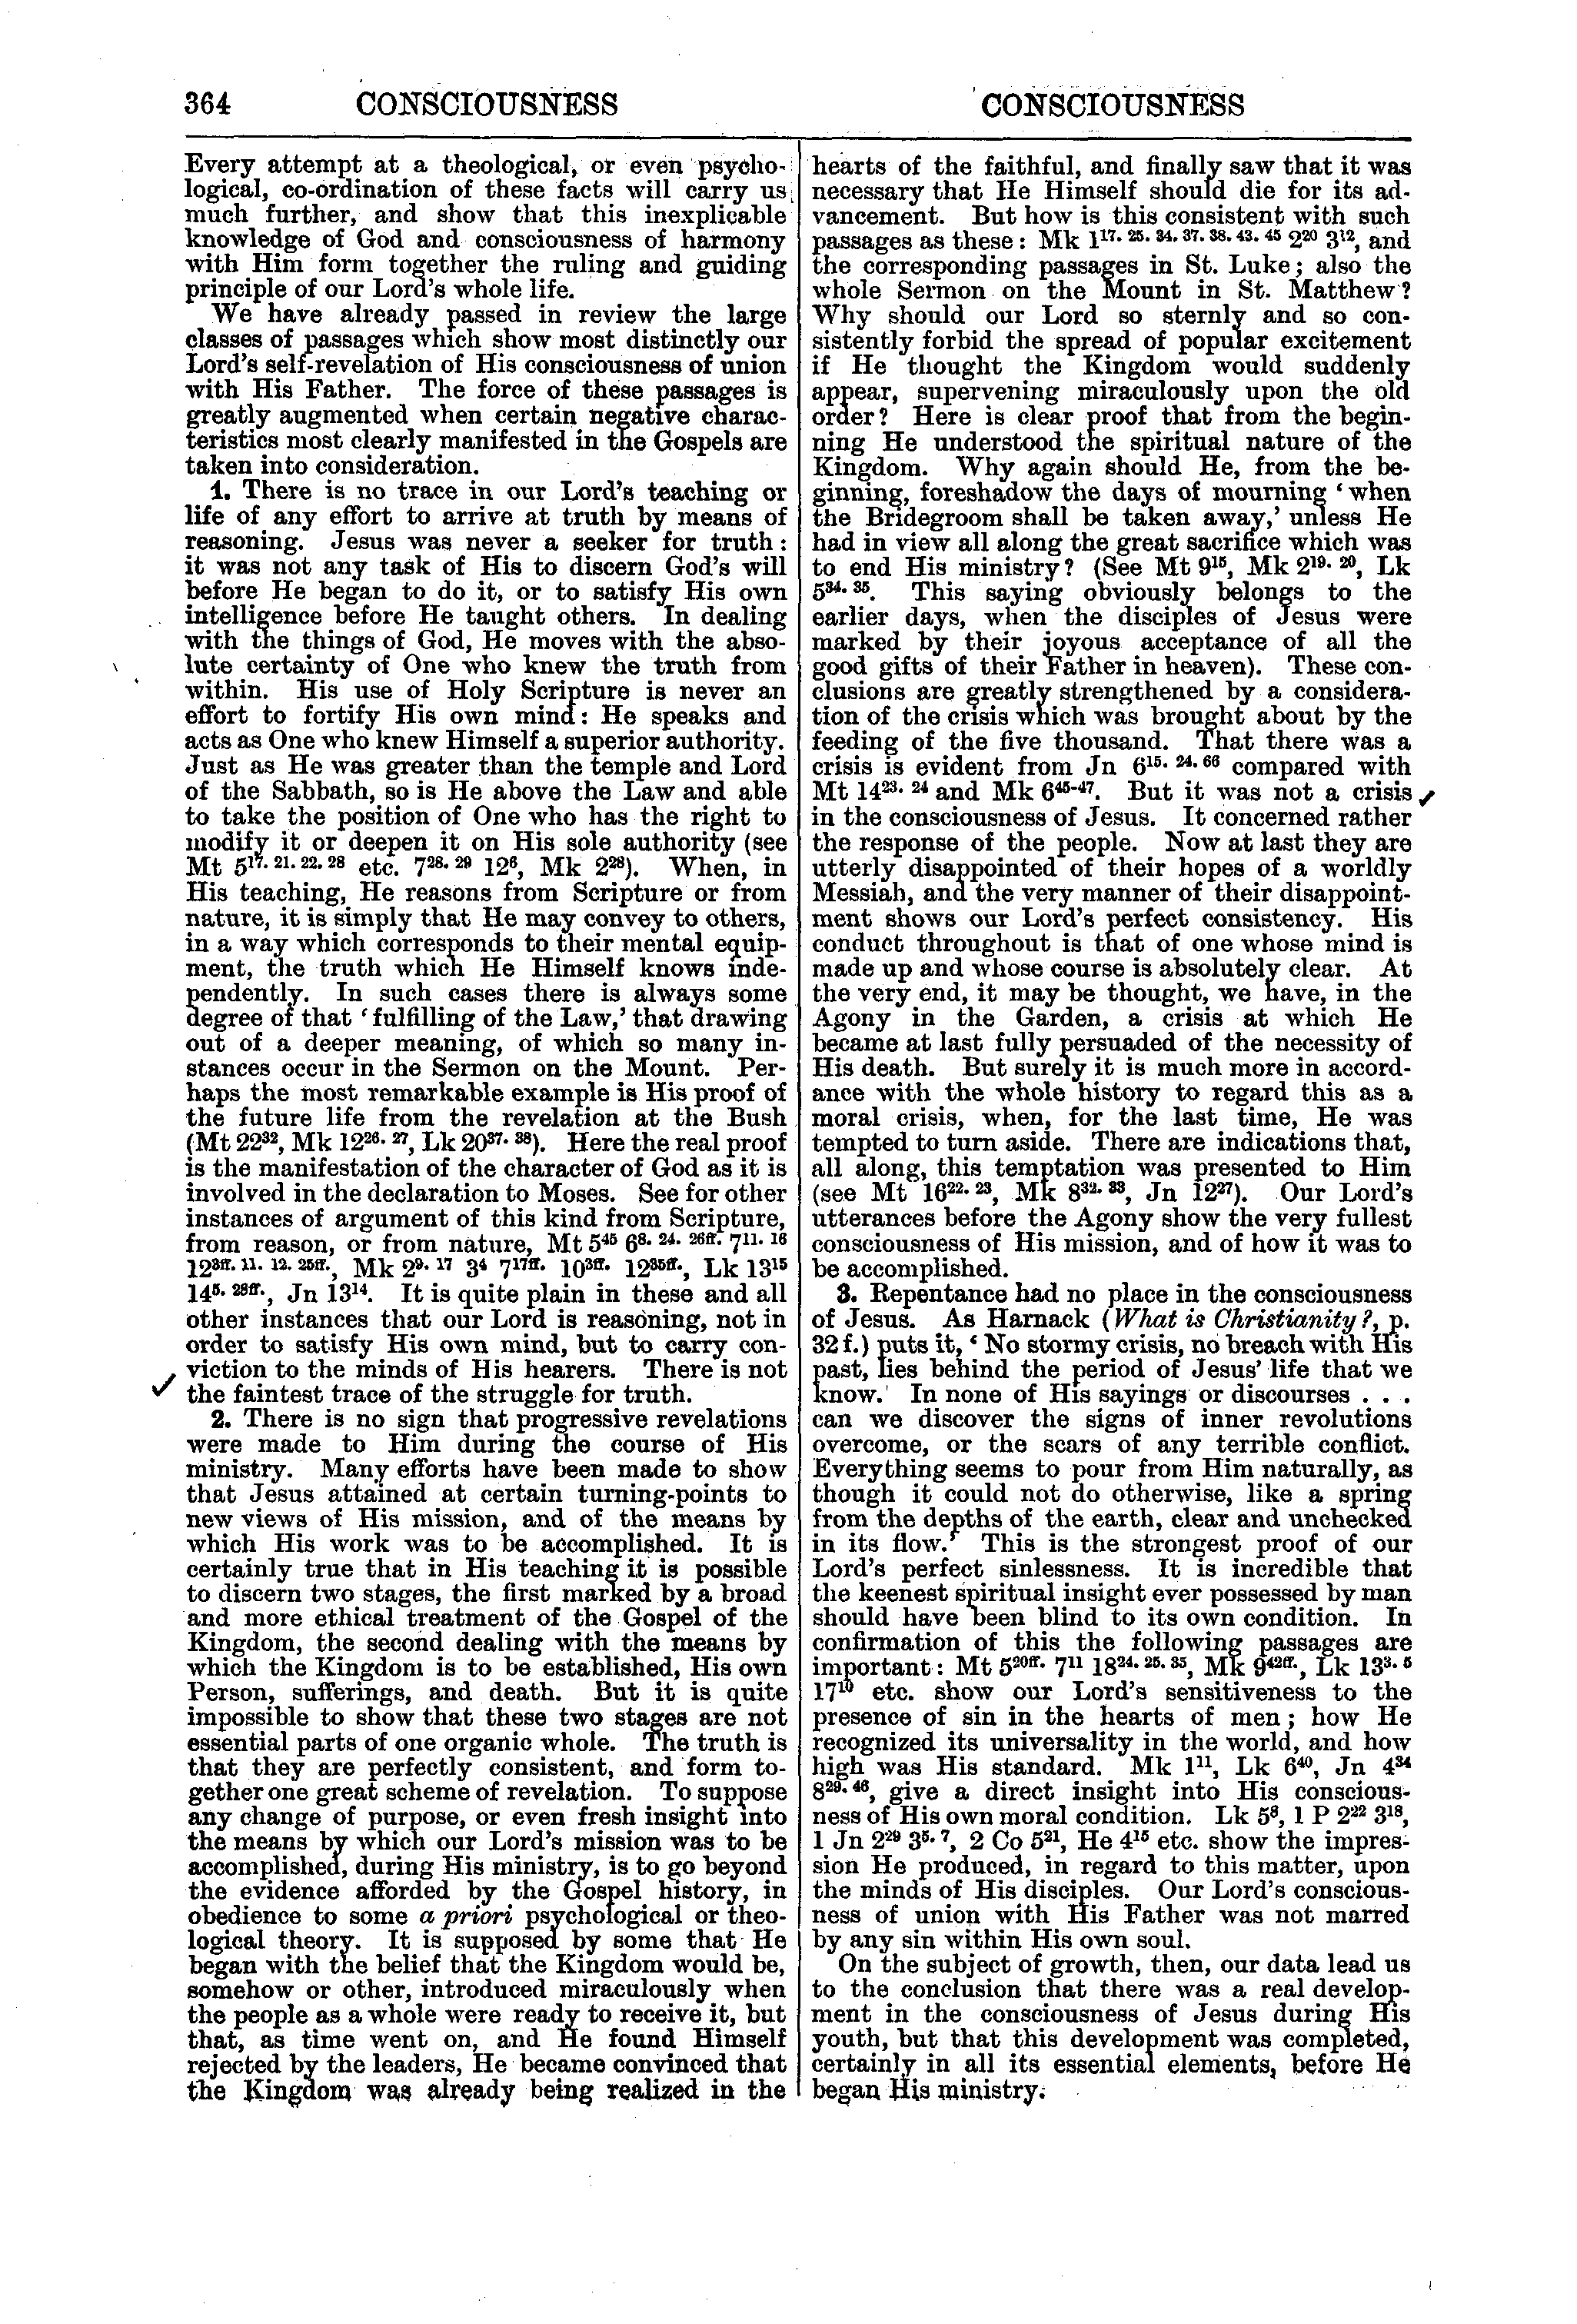 Image of page 364